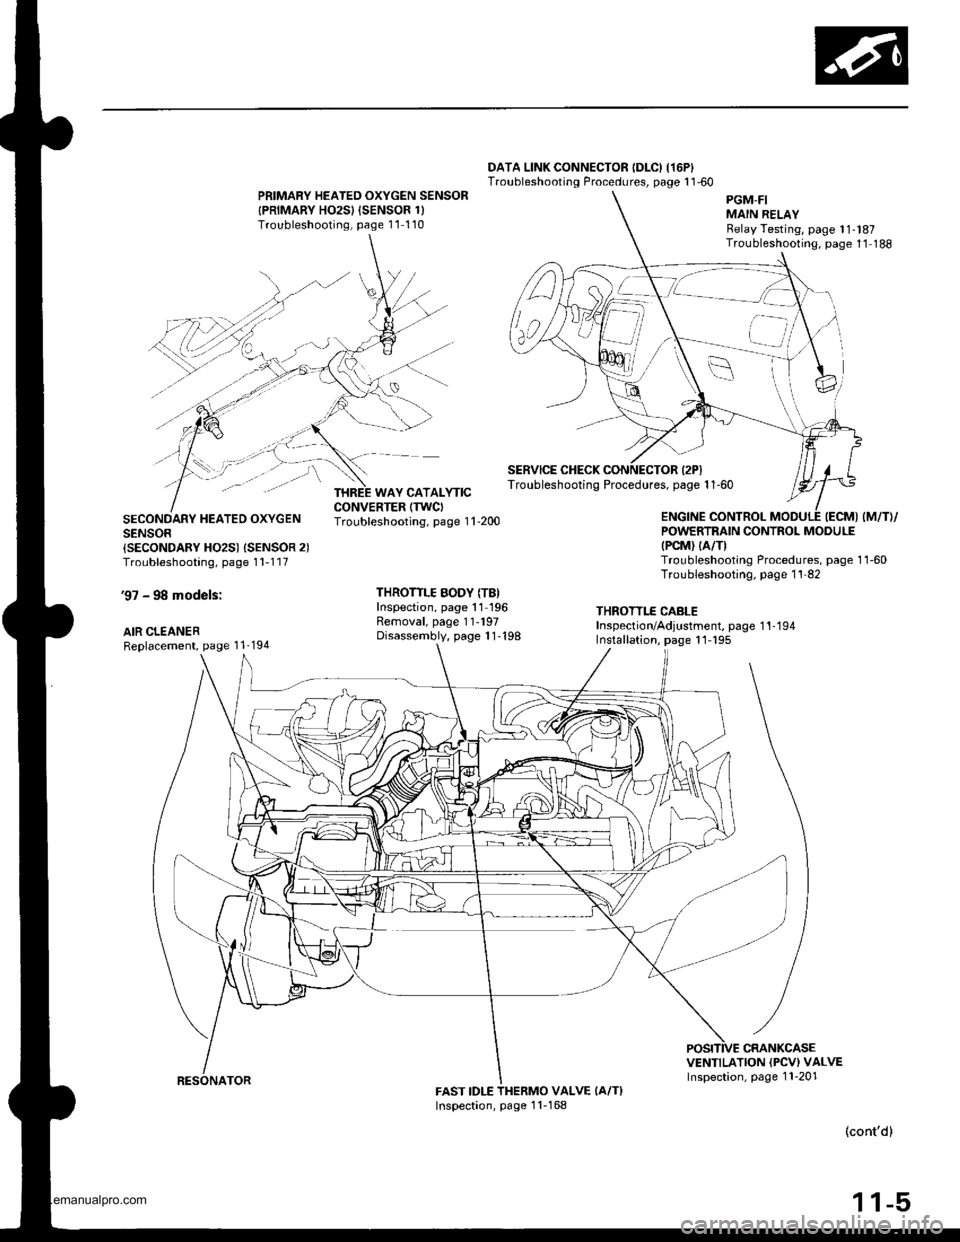 HONDA CR-V 1998 RD1-RD3 / 1.G Workshop Manual 
DATA LINK CONNECTOR {DLC) I16P}Troubleshooting Procedures, page 1 160PRIMARY HEATED OXYGEN SENSOR
{PRIMARY HO2SI {SENSOR 1)Troubleshooling, page 11 110
SECONDARY HEATED OXYGENSENSOR{SECONDARY HO2S) 